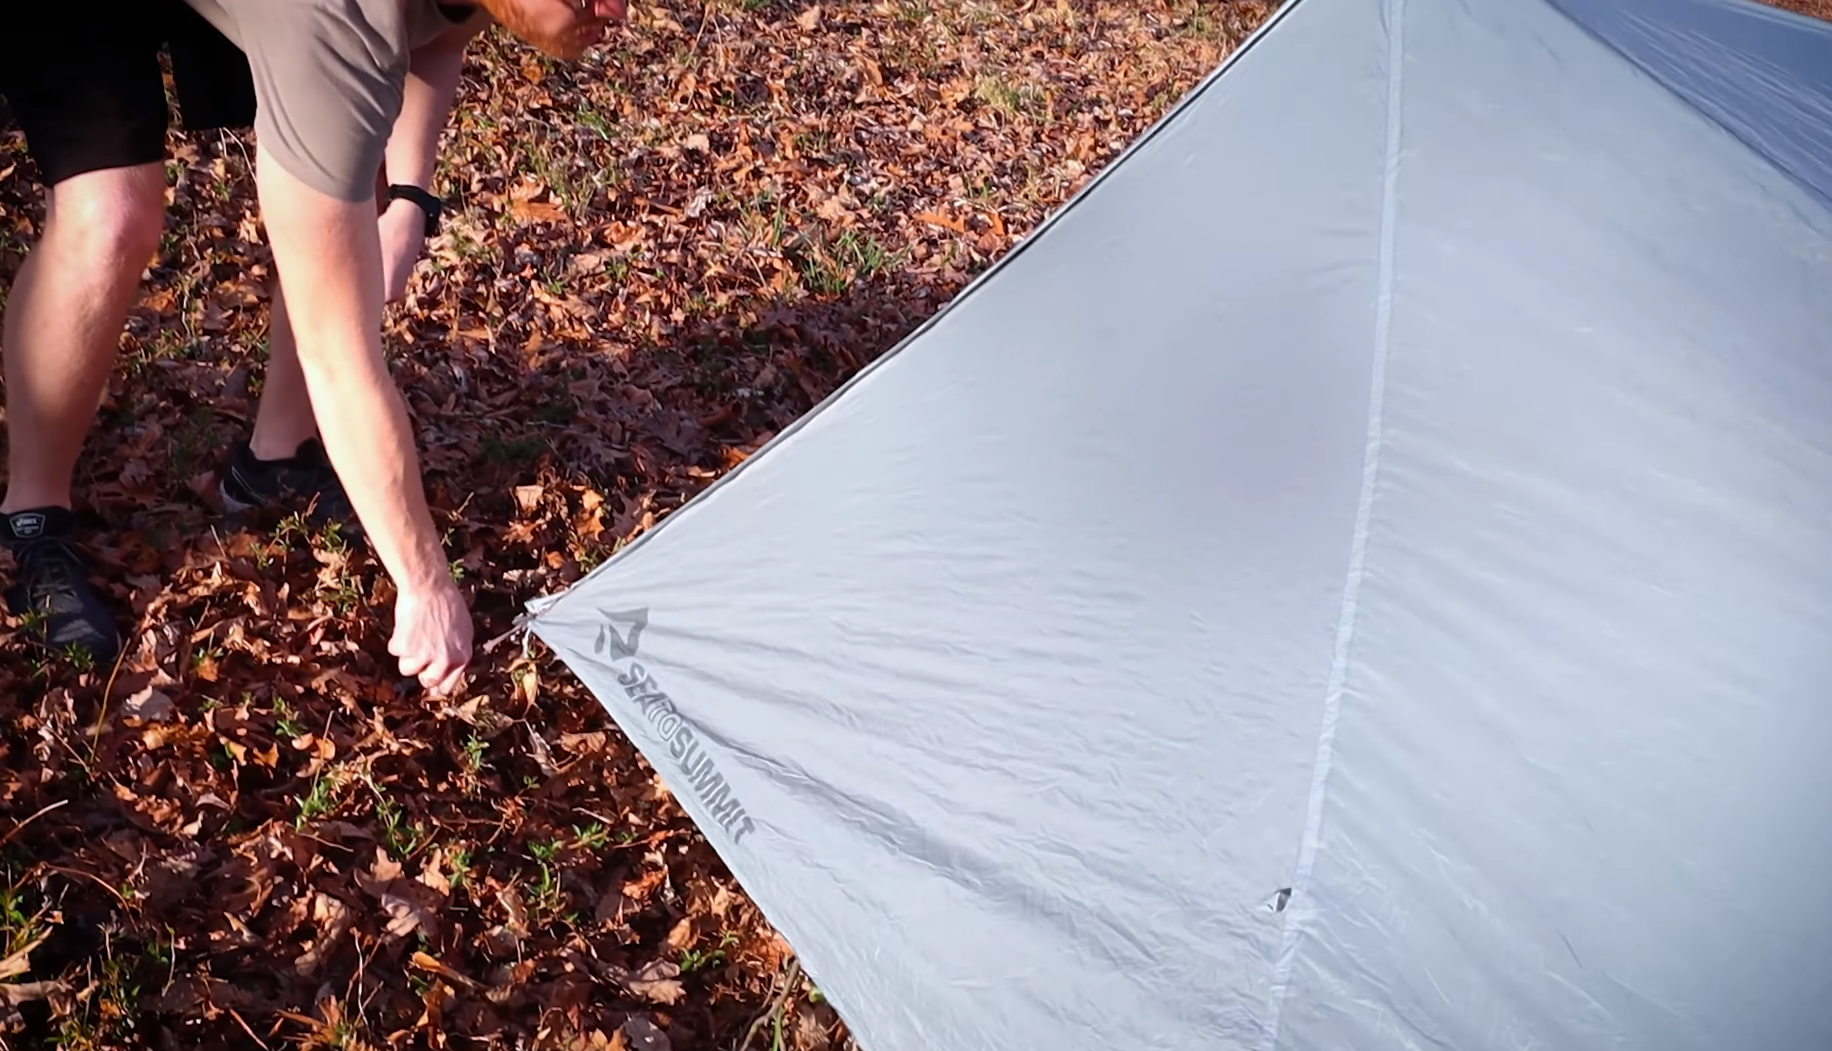 Take a sun break to dry off your tent